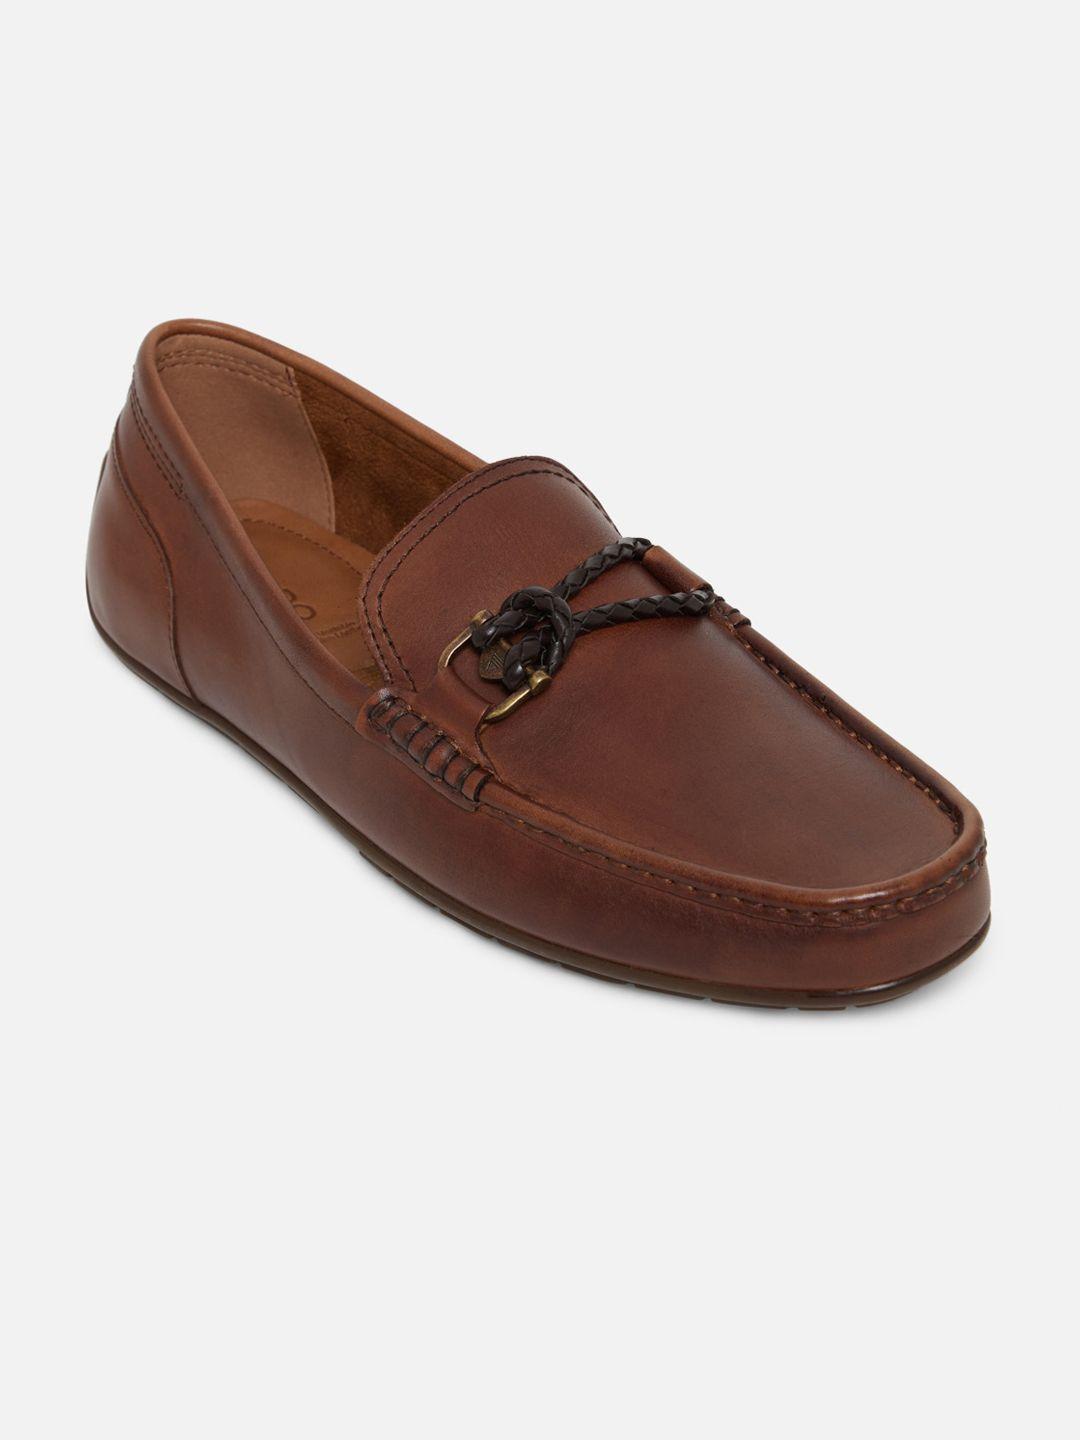 aldo-men-brown-textured-leather-loafers